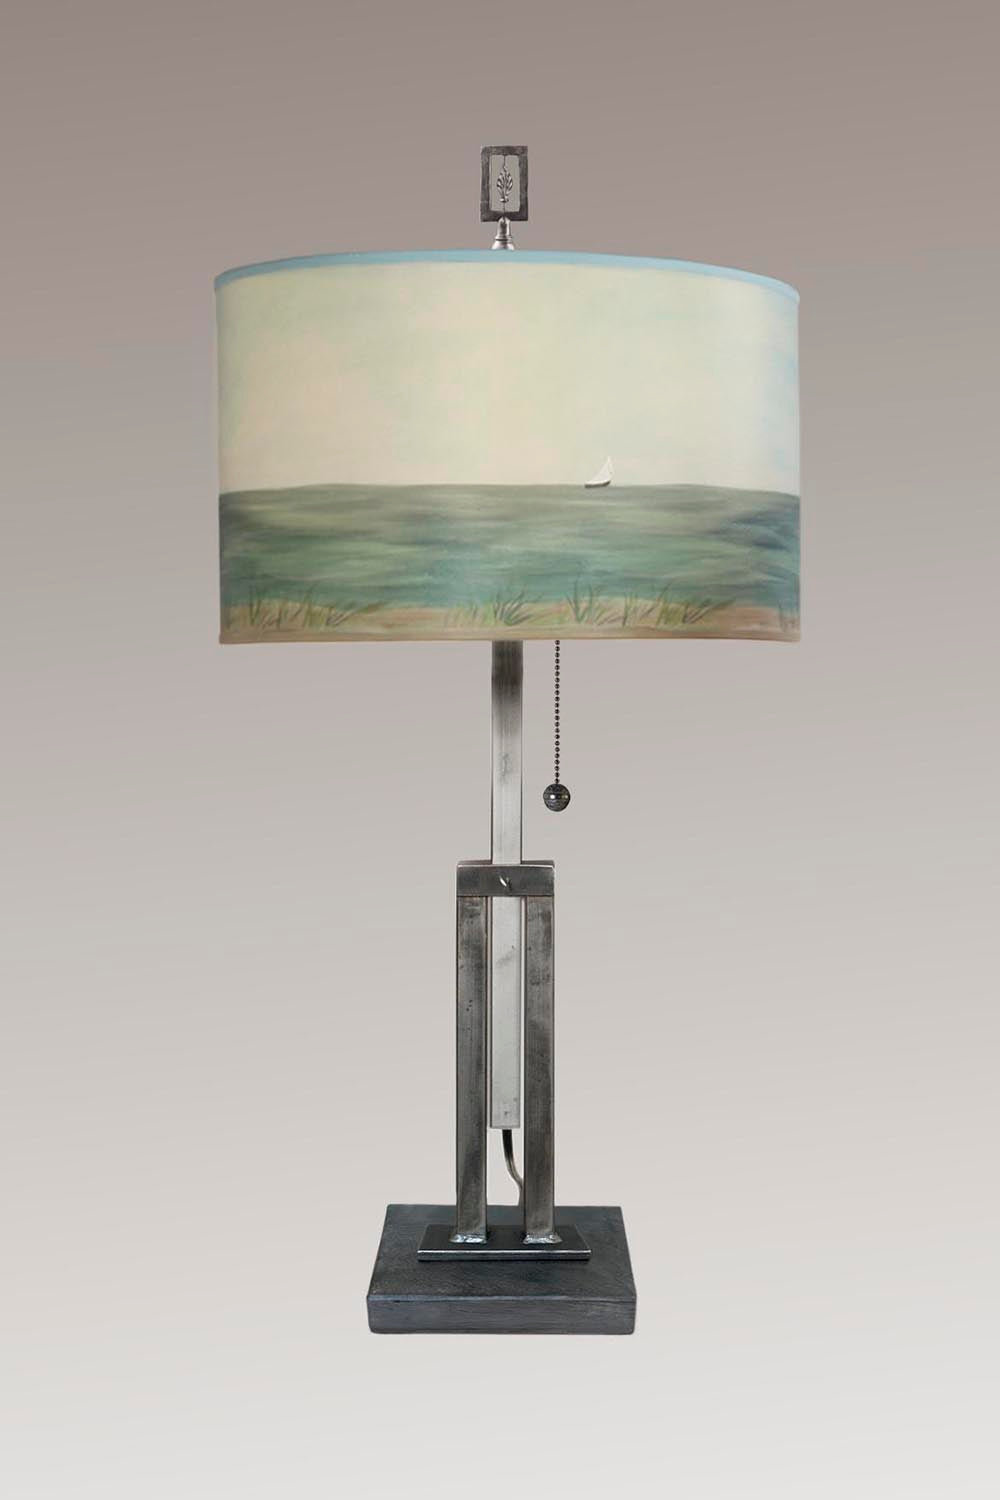 Janna Ugone & Co Table Lamps Adjustable-Height Steel Table Lamp with Large Drum Shade in Shore